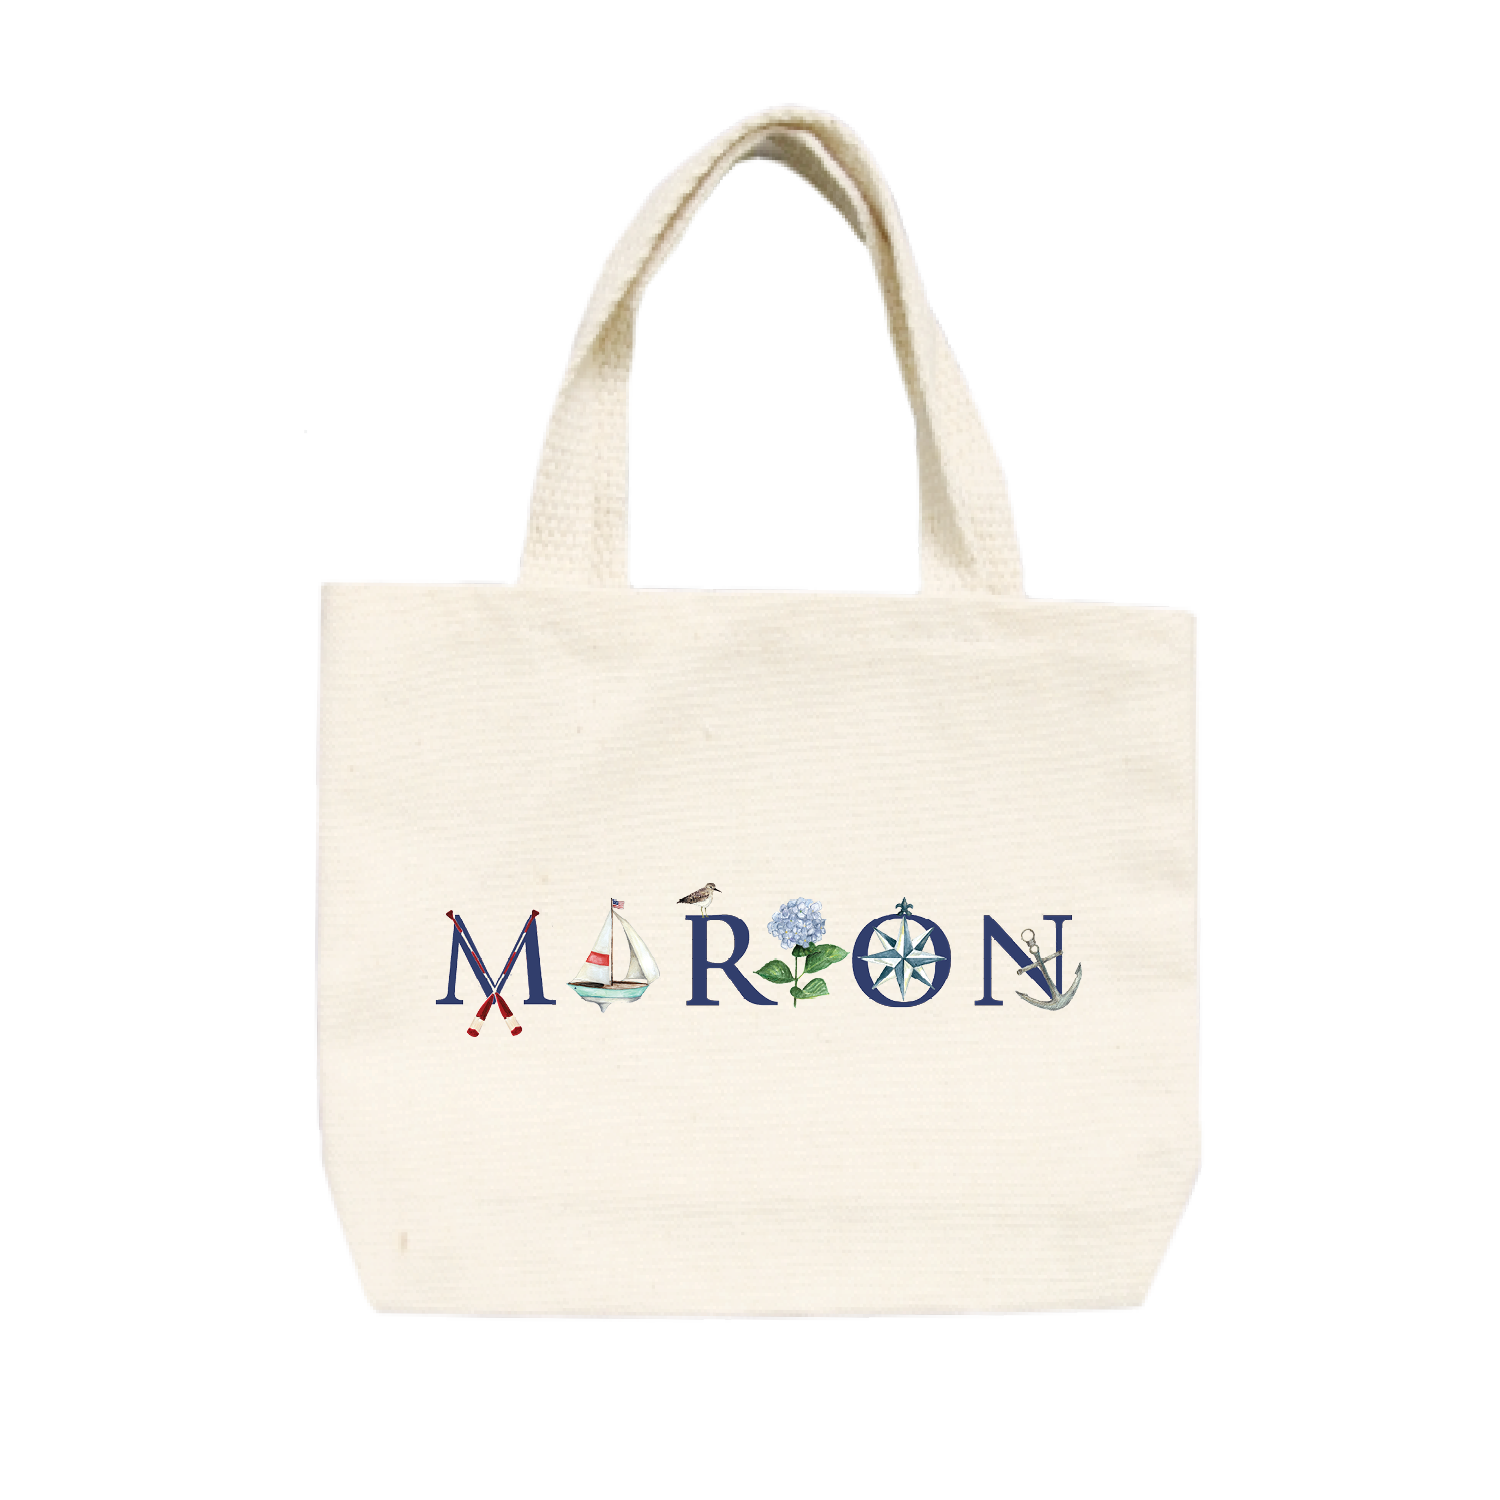 Marion small tote